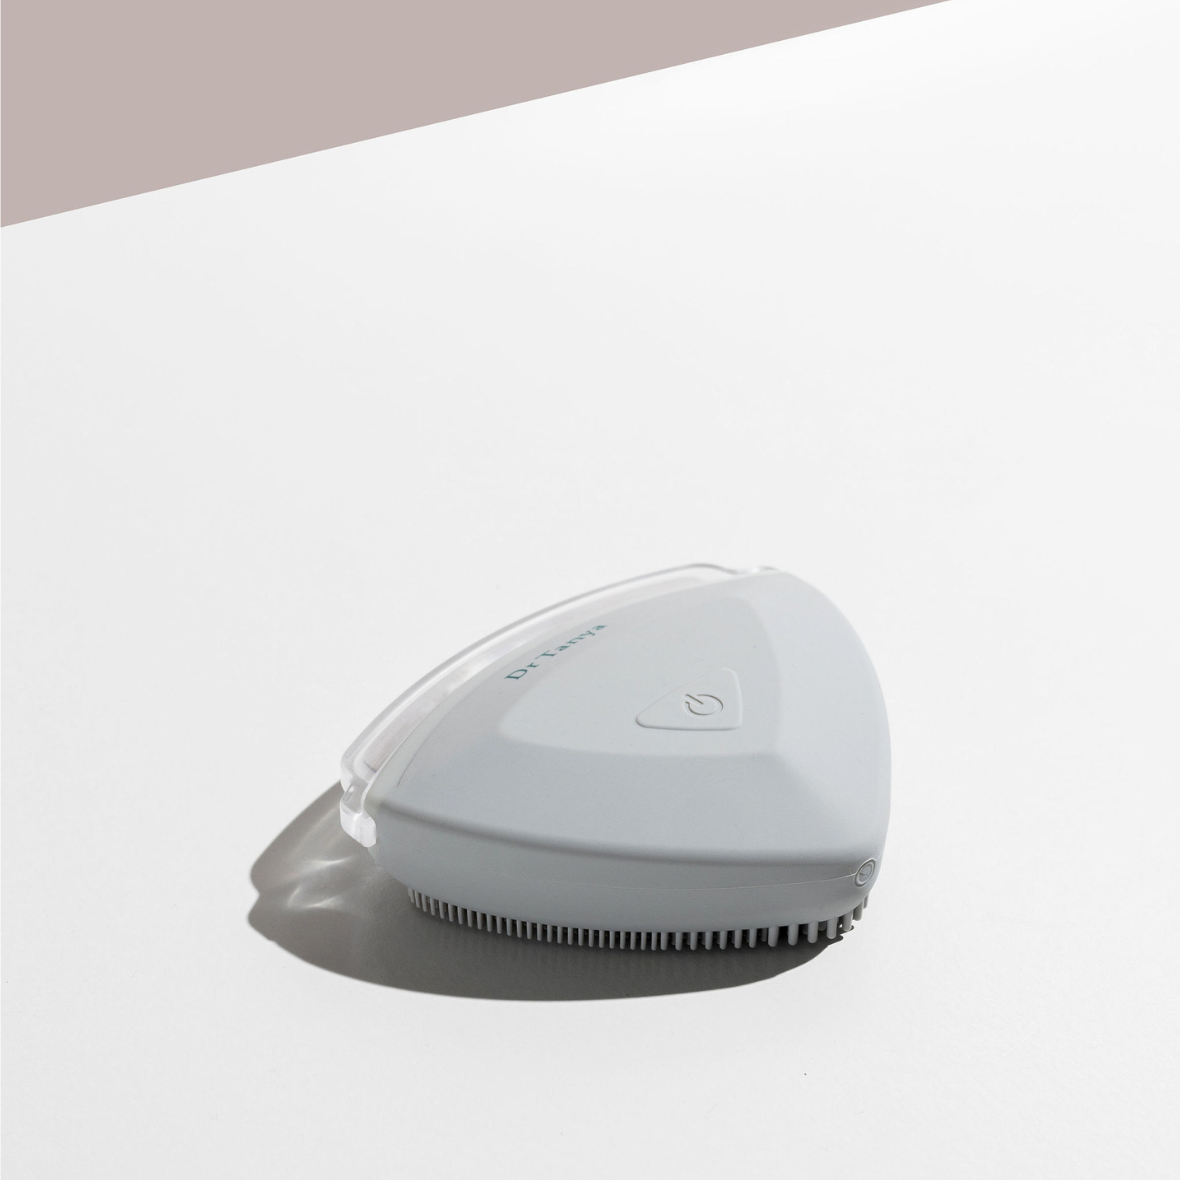 A white facial exfoliating device with a power button and a clear lid on top